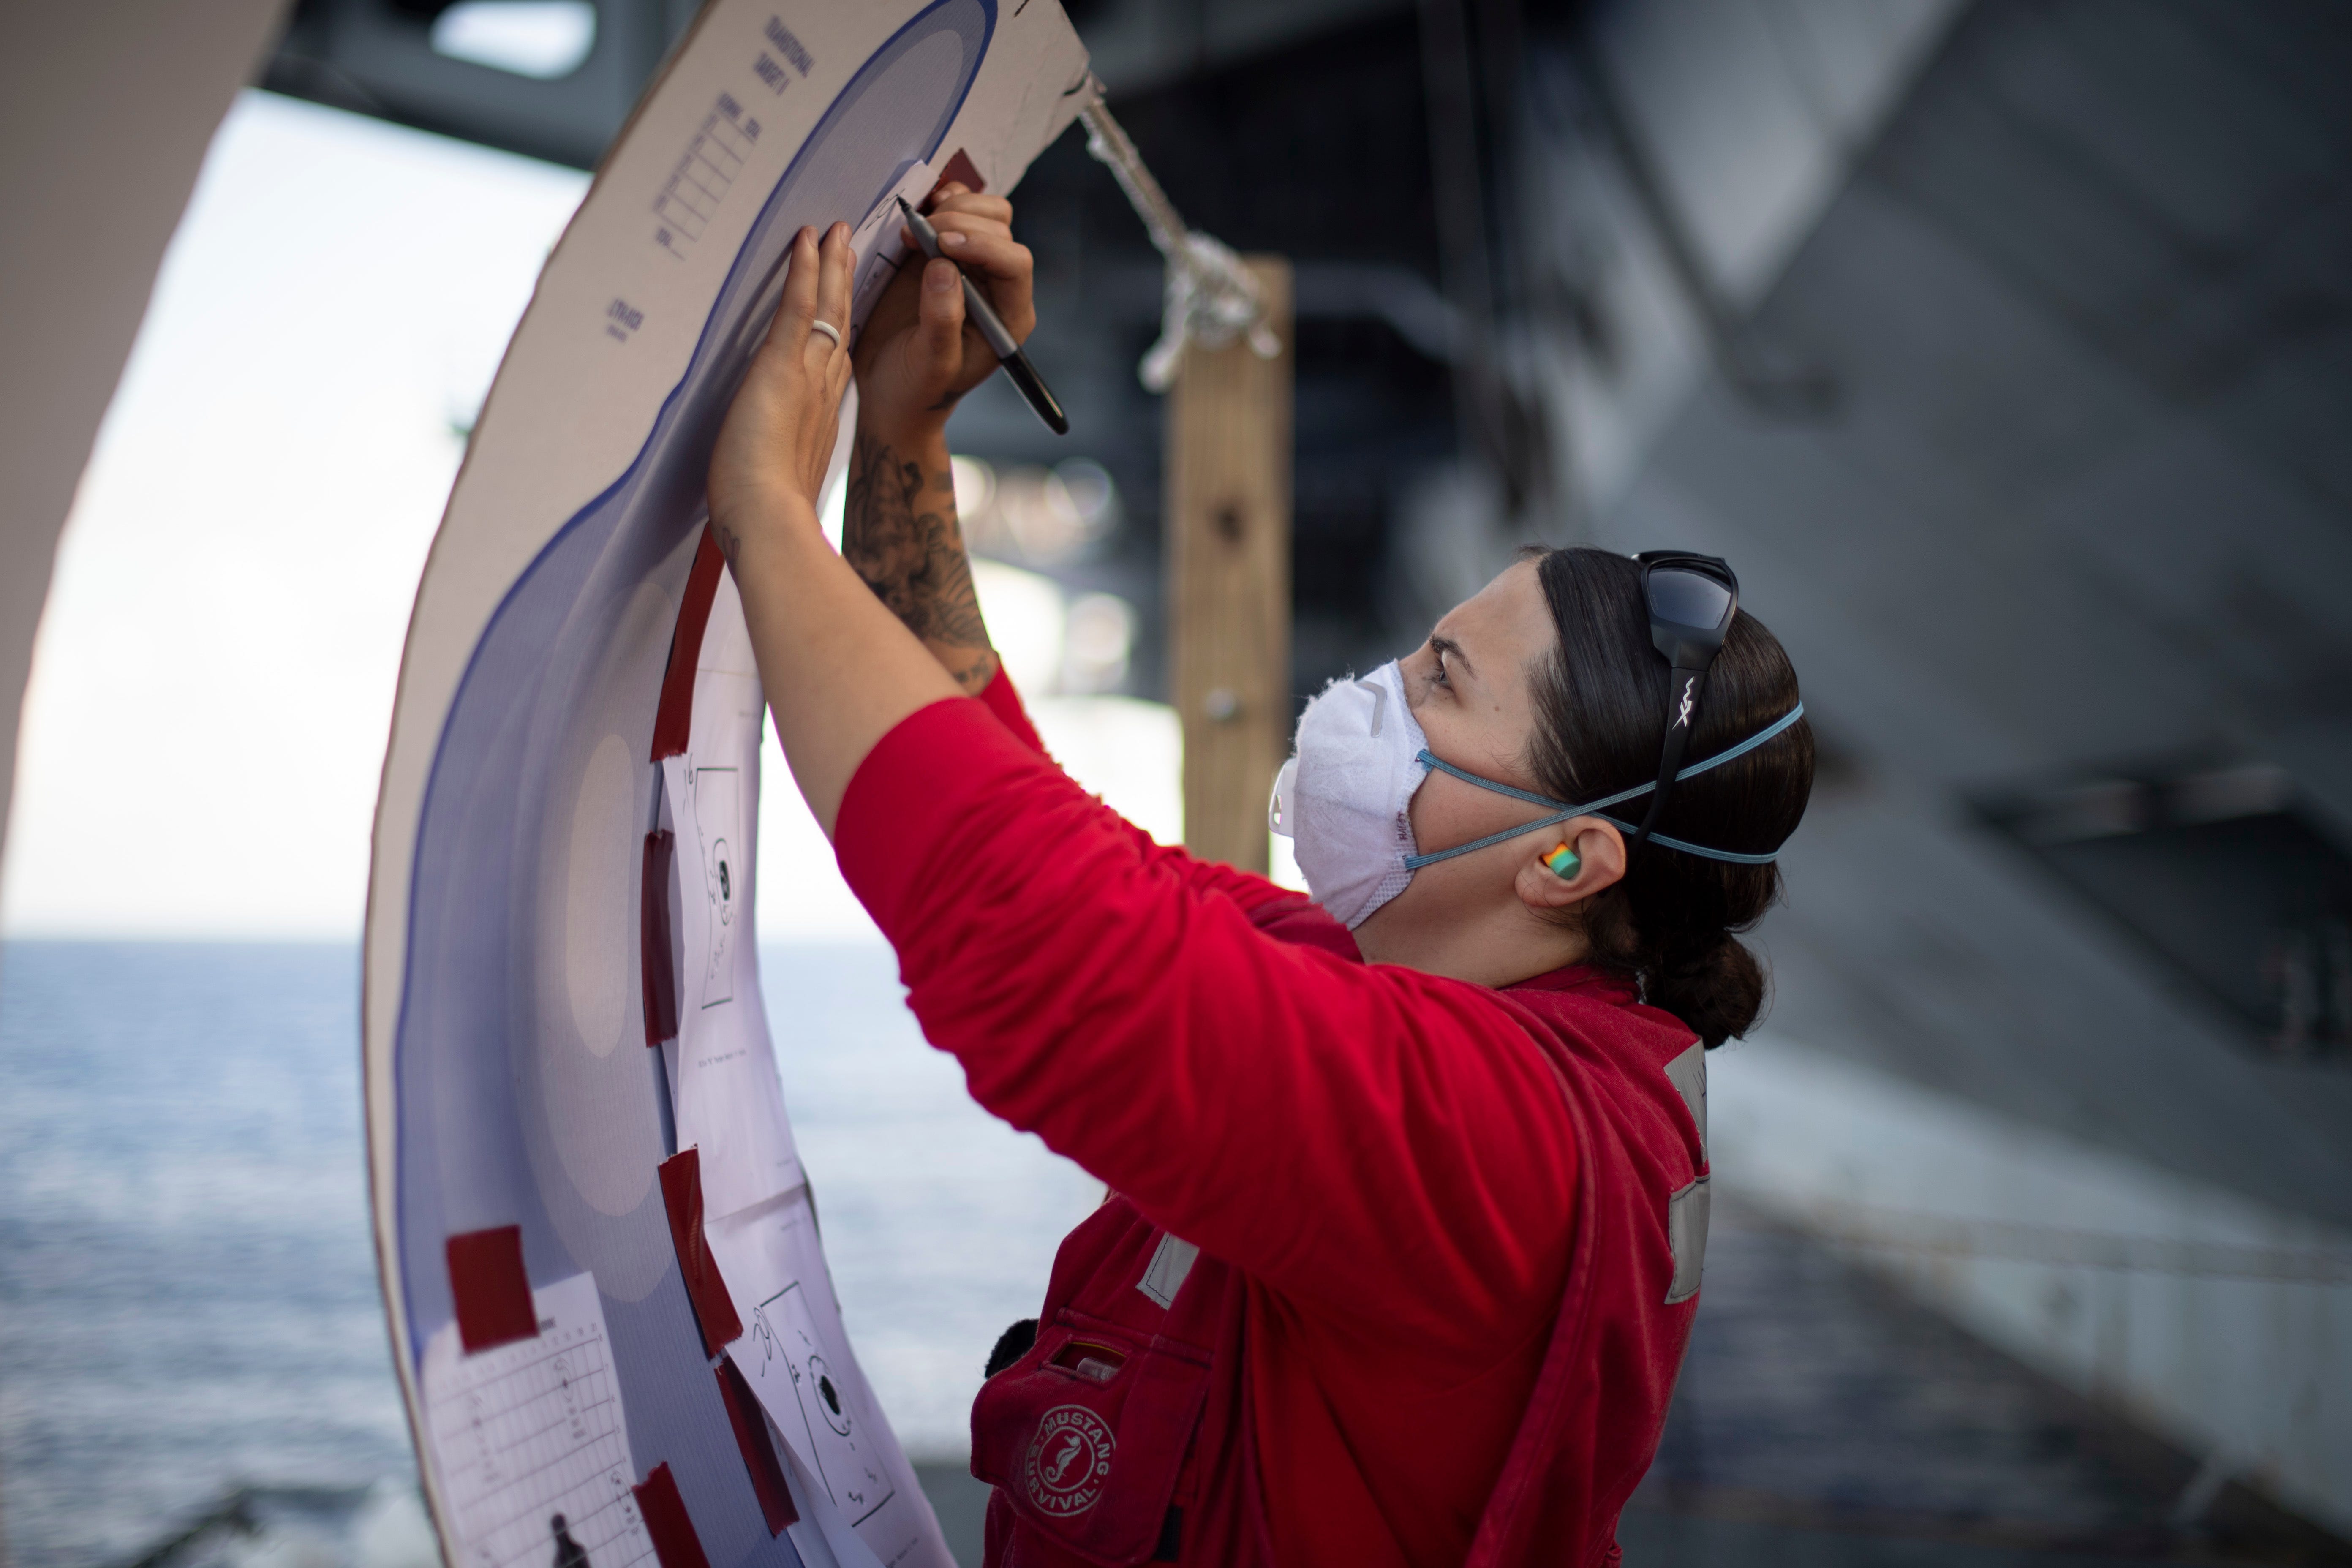 Navy Gunner’s Mate 2nd Class Angela Haley, from Farmington, Minn., checks a target board after a small arms qualification aboard the aircraft carrier USS Theodore Roosevelt Sunday. Following an extended visit to Guam in the midst of the COVID-19 global pandemic, Theodore Roosevelt is underway conducting carrier qualifications.